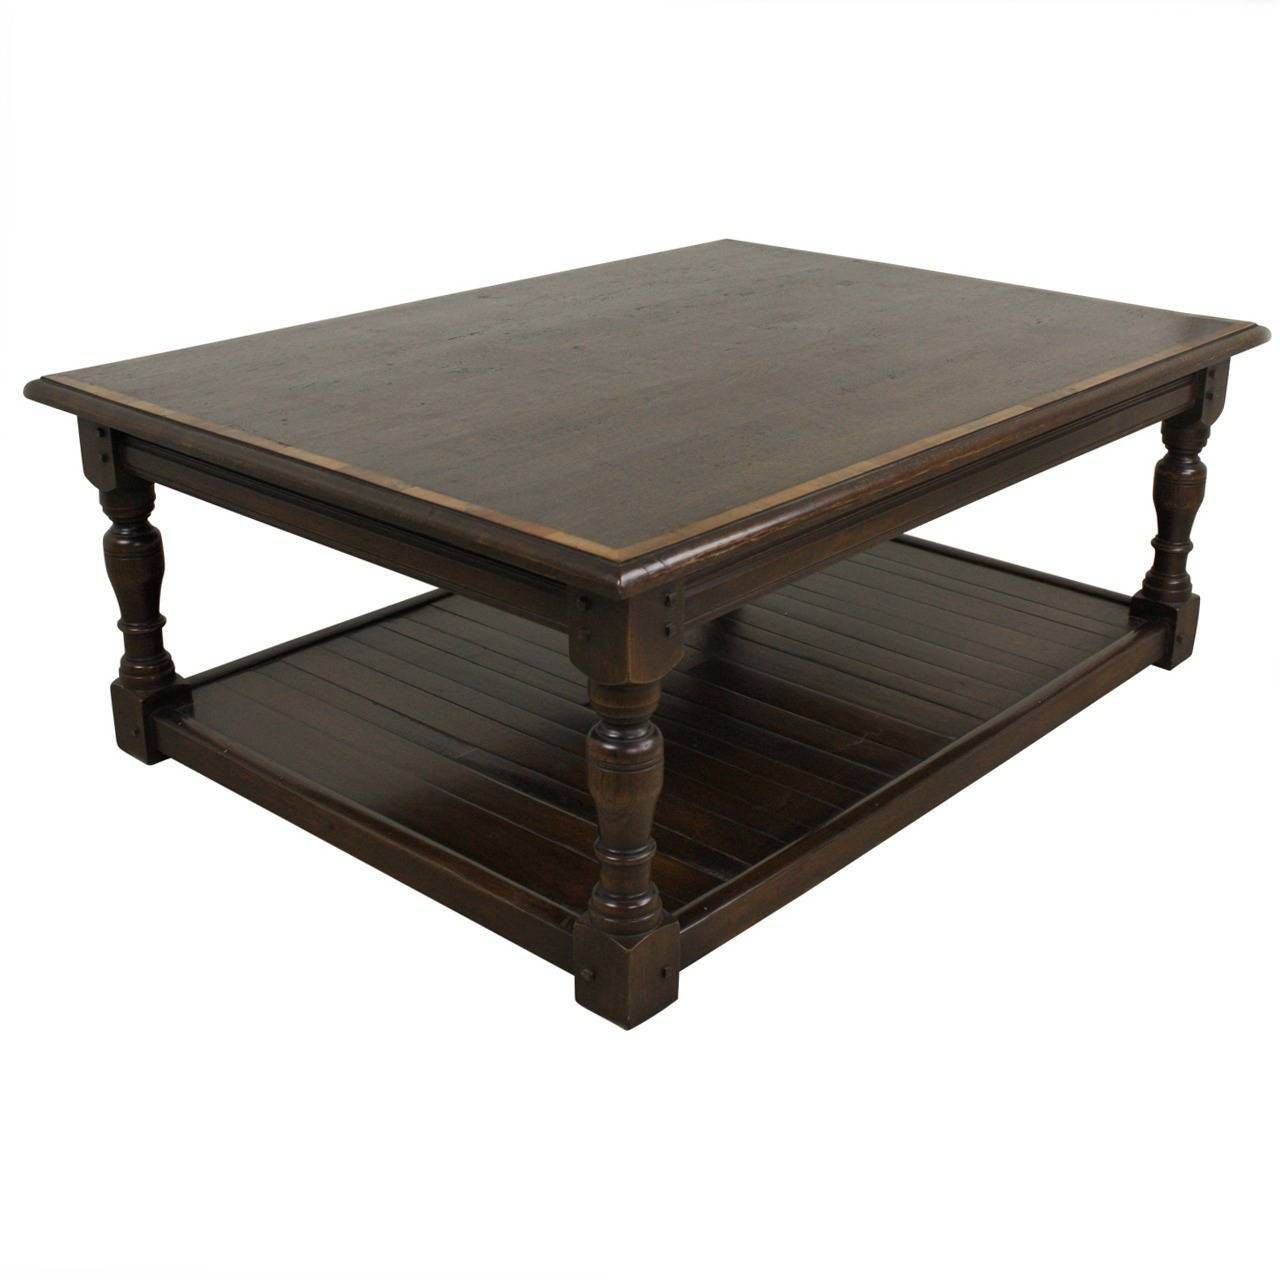 Dark Oak English Potboard Coffee Table For Sale At 1stdibs For Dark Coffee Tables (View 25 of 30)